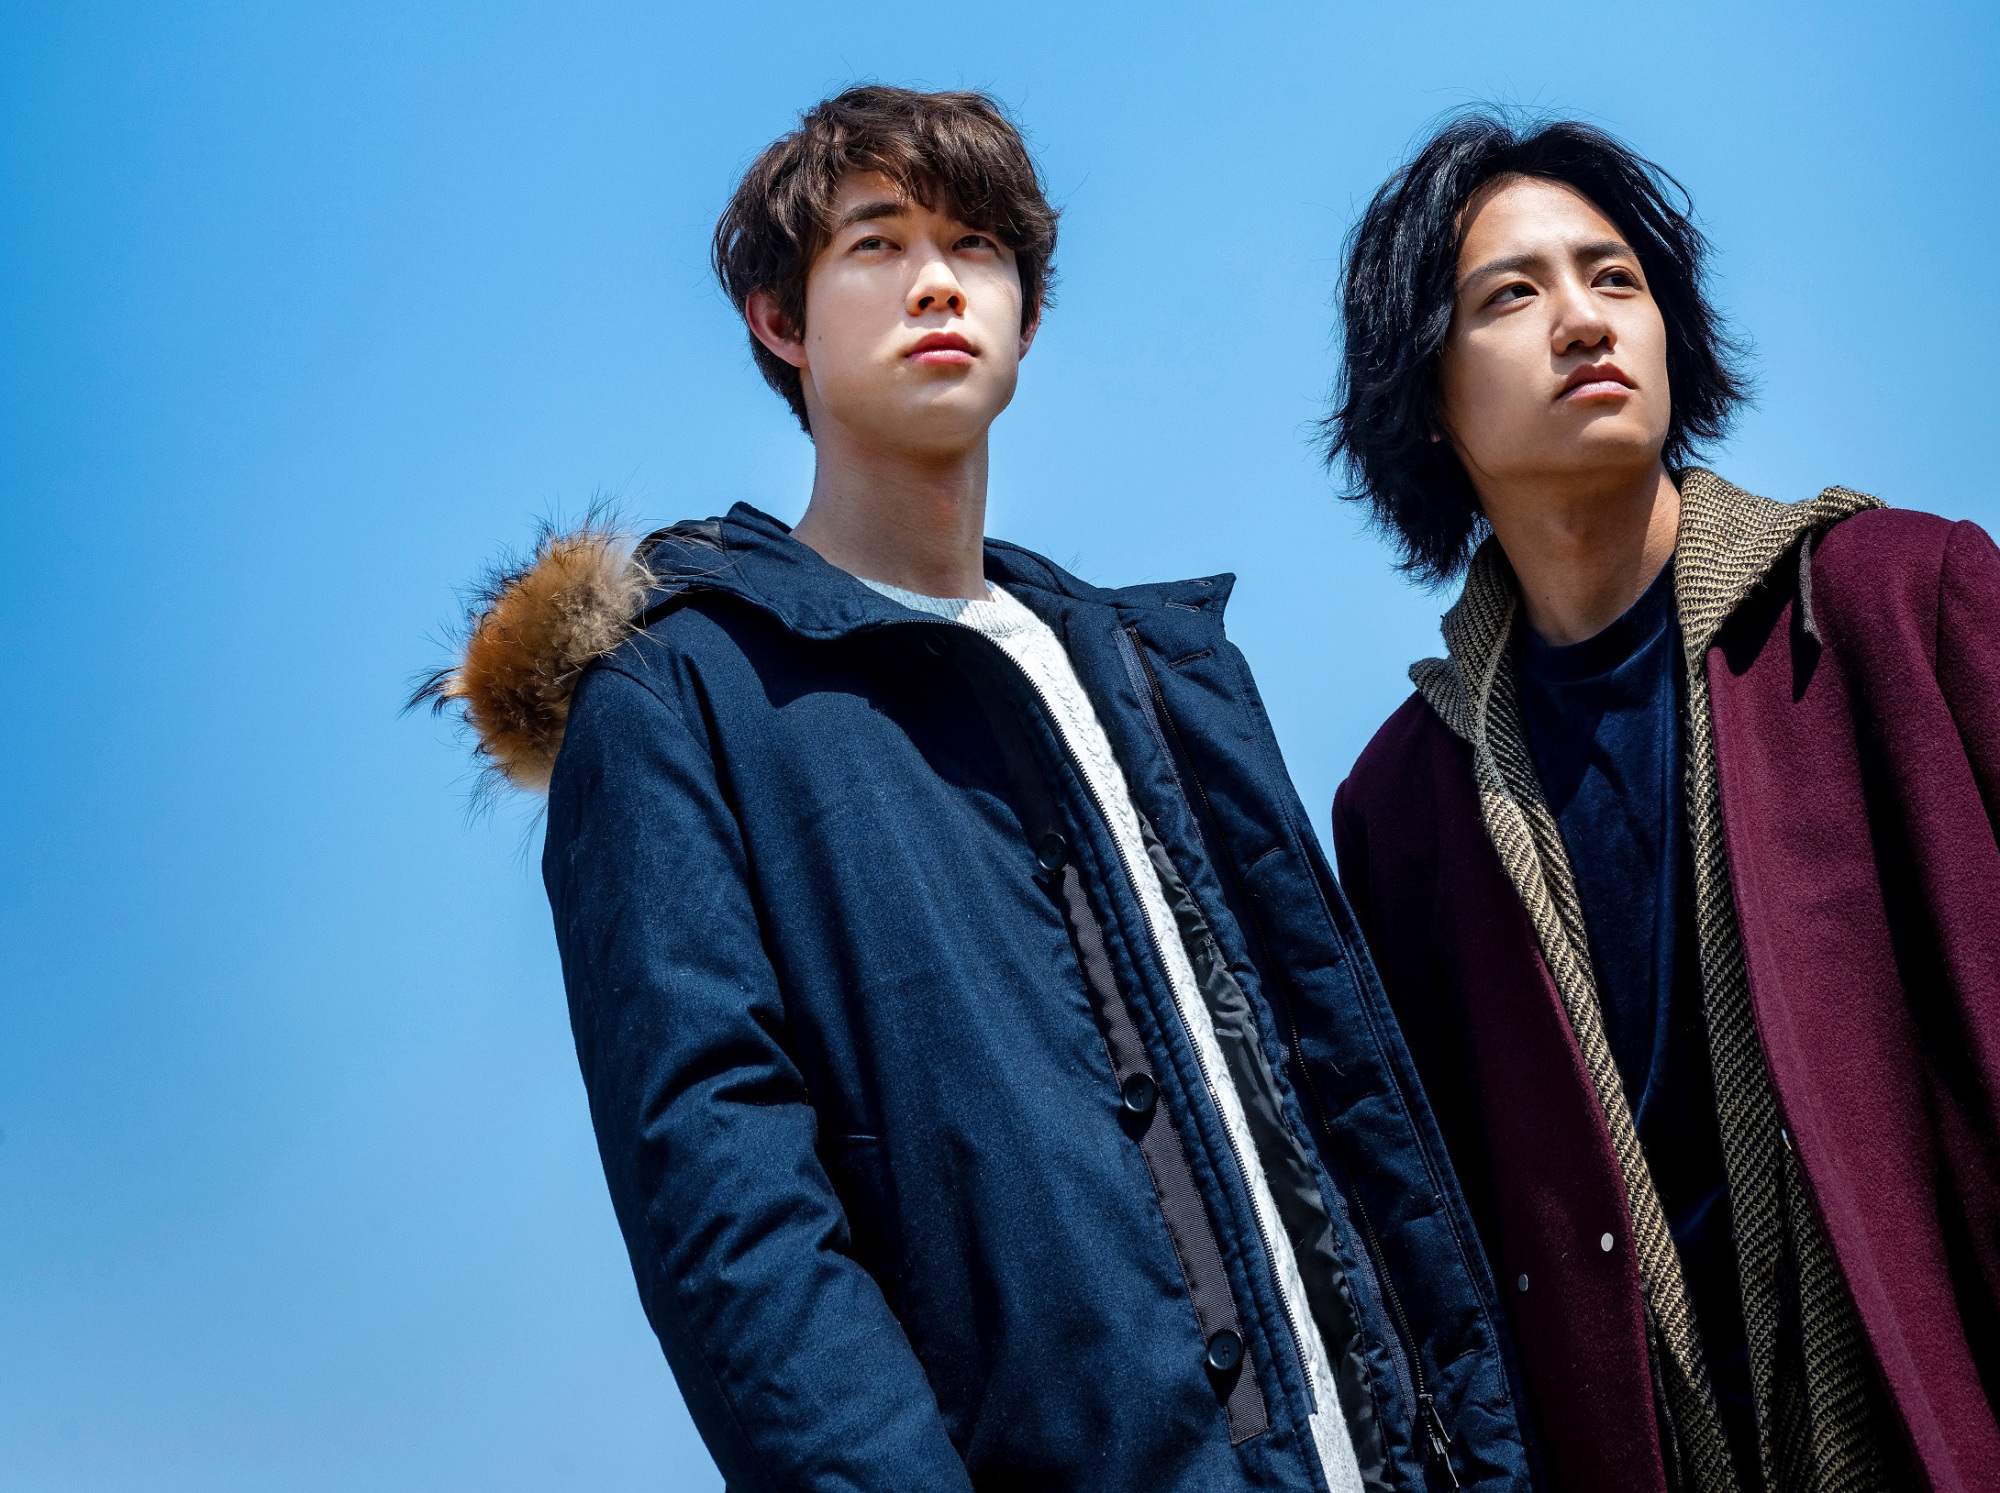 Rough roads: Hio Miyazawa (left) and Kisetsu Fujiwara star as lovers who split up and follow different paths in life in 'his.' | &#169; 2020 'HIS' FILM PARTNERS